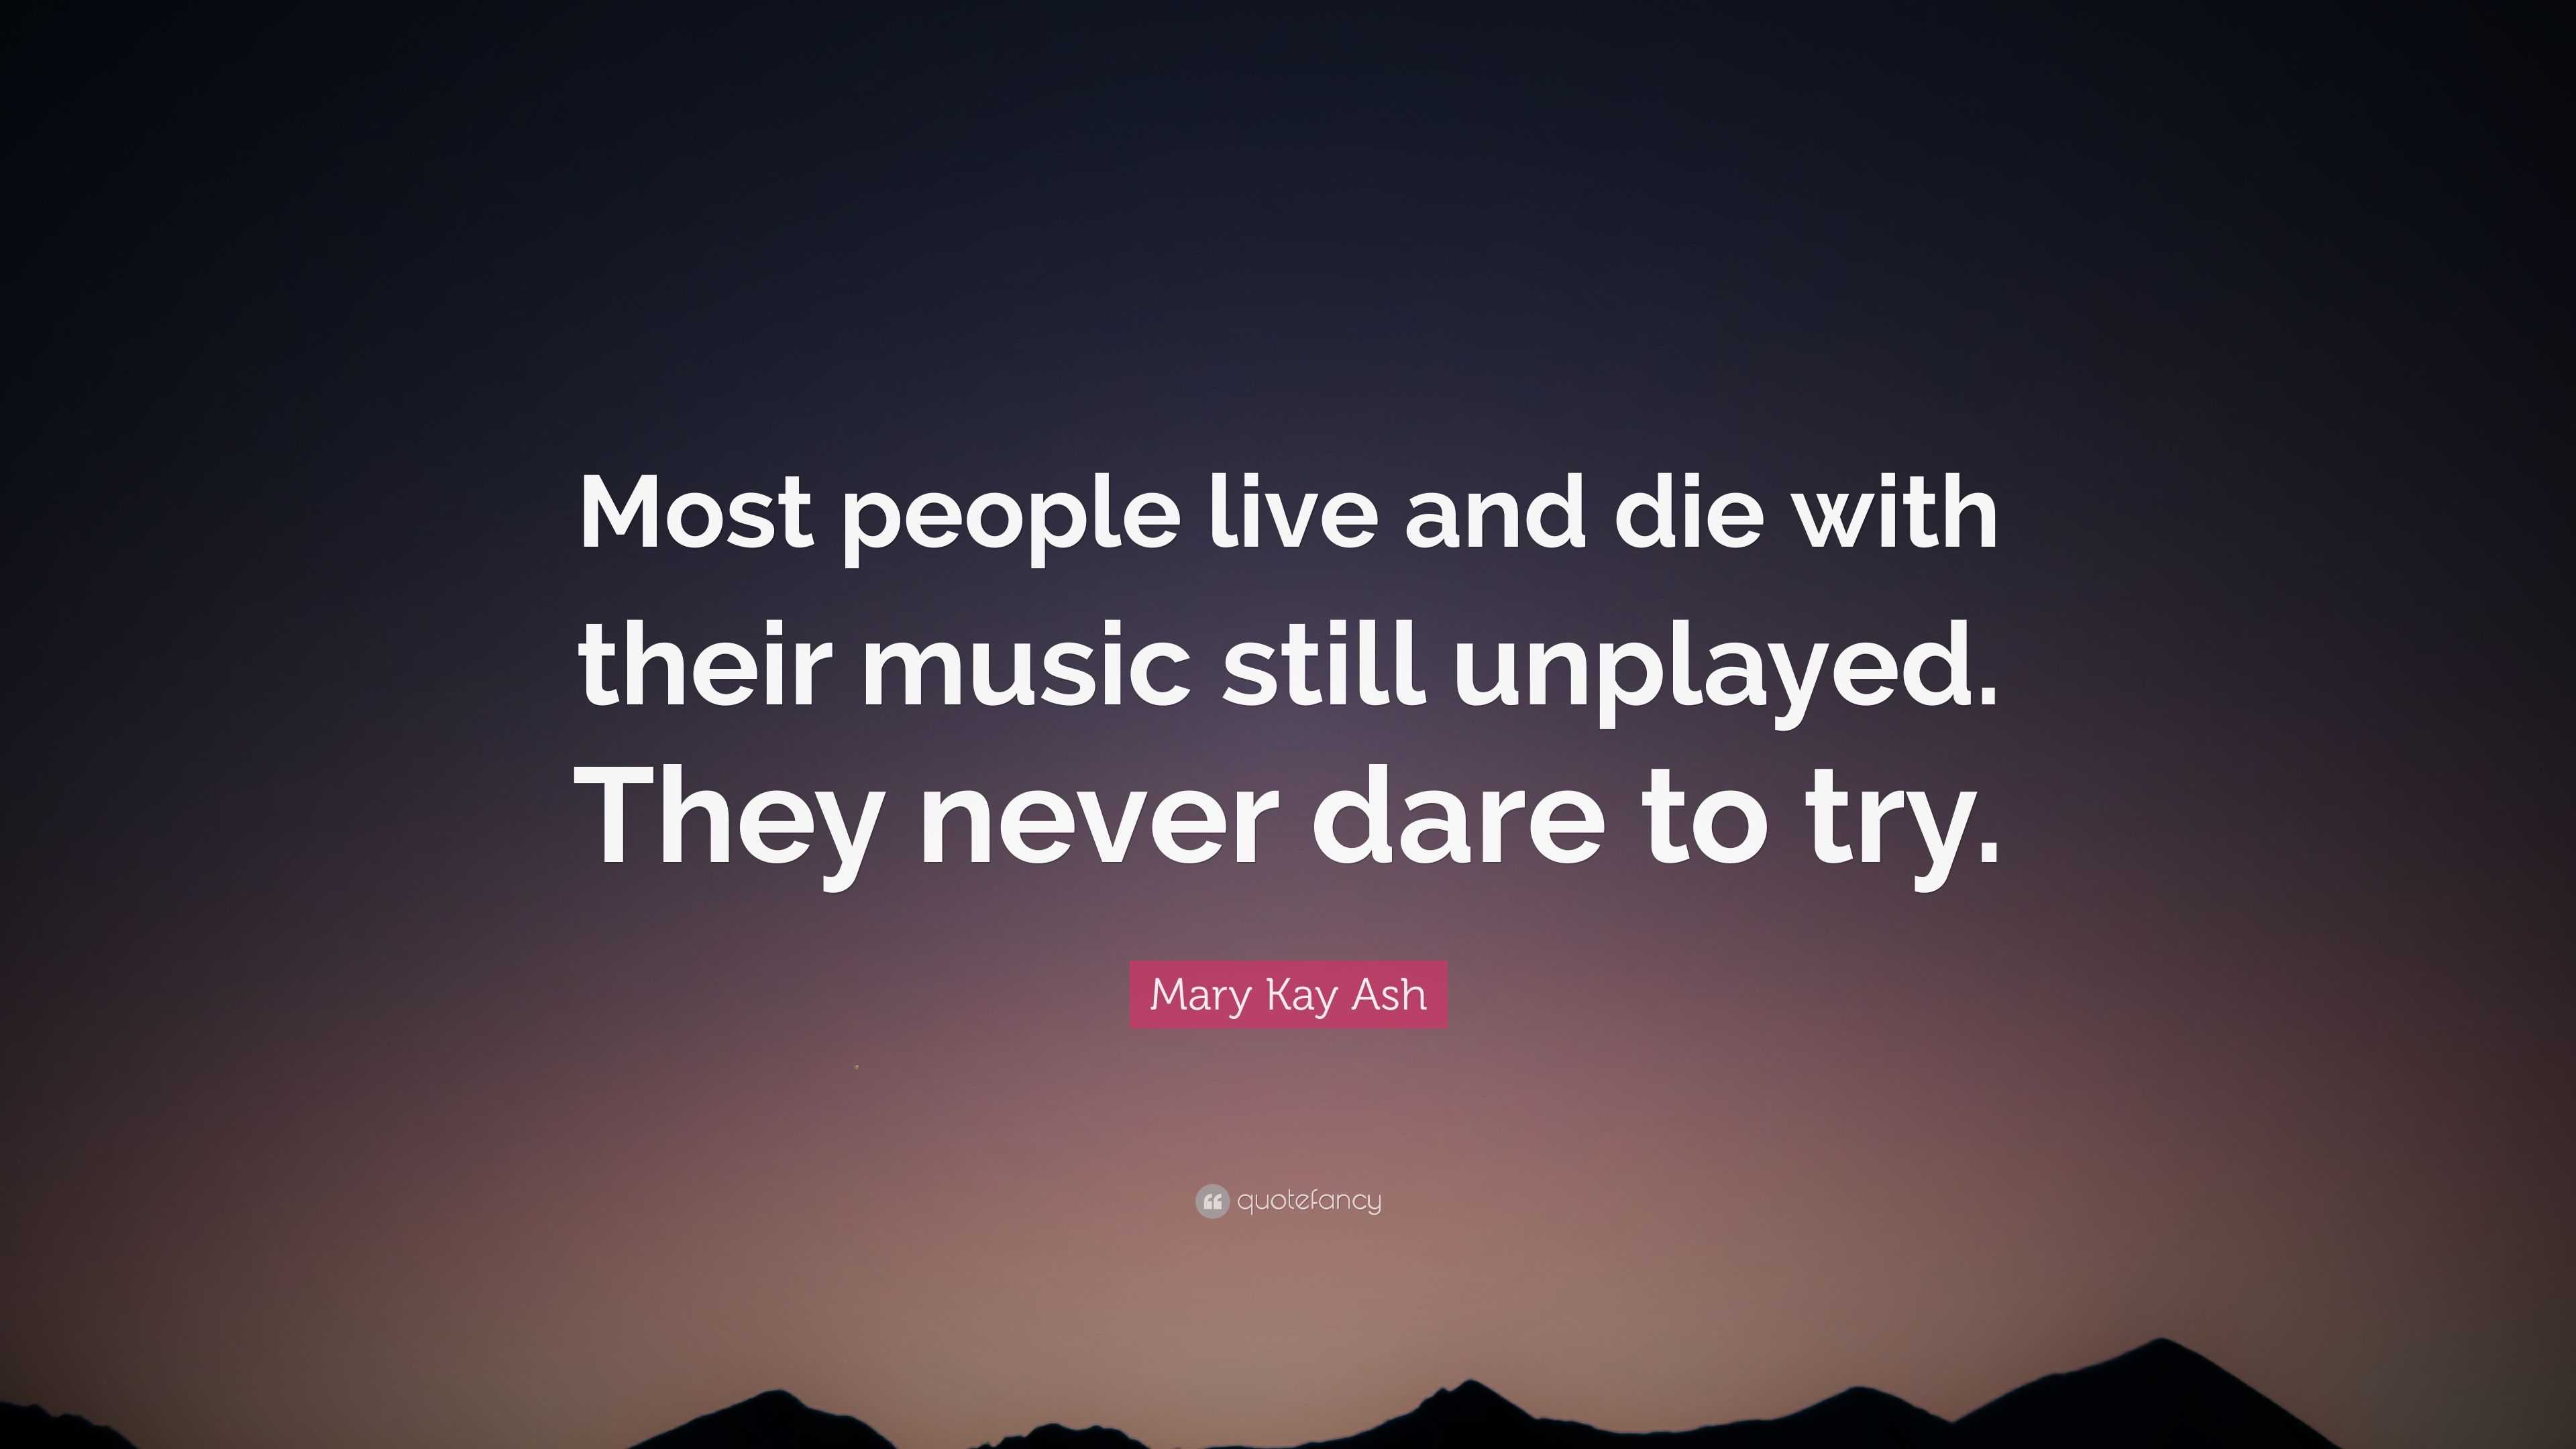 Mary Kay Ash Quote: “Most people live and die with their music still ...